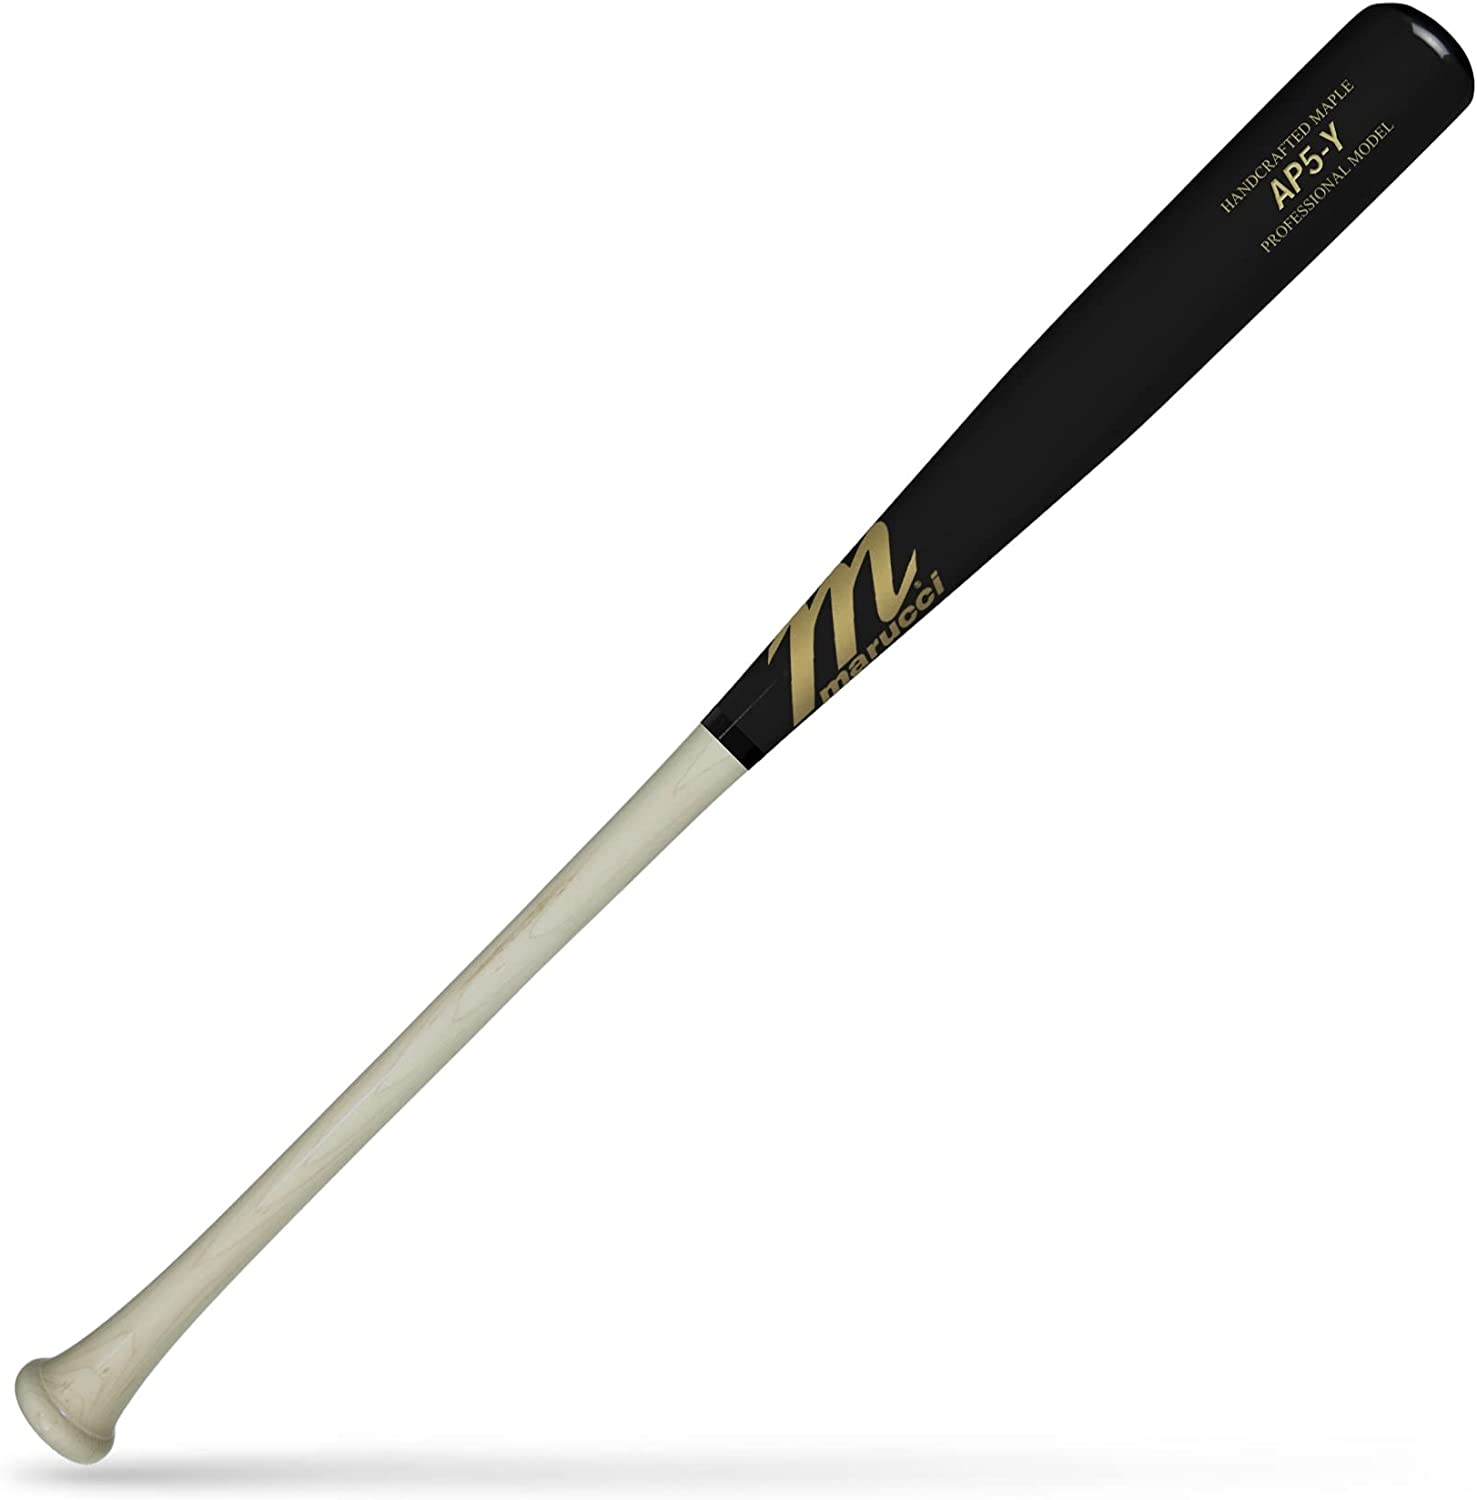 The Marucci AP5 Youth Wood Bat is designed to help young ball players unleash their power at the plate. Made with the same specifications as the adult AP5, this youth pro model bat features a tapered knob and traditional handle, providing a comfortable grip for young players. The large barrel is end-loaded, delivering maximum power and a satisfying thud when you make contact with the ball. Handcrafted from Marucci's top-quality maple, the barrel is bone rubbed to ensure optimal wood density, providing a solid and durable bat that's ready to perform. With a 2 1/4 inch barrel diameter, this youth wood bat is perfect for players of all skill levels who want to take their game to the next level. And with a 30-day warranty included, you can feel confident in your purchase and enjoy peace of mind.